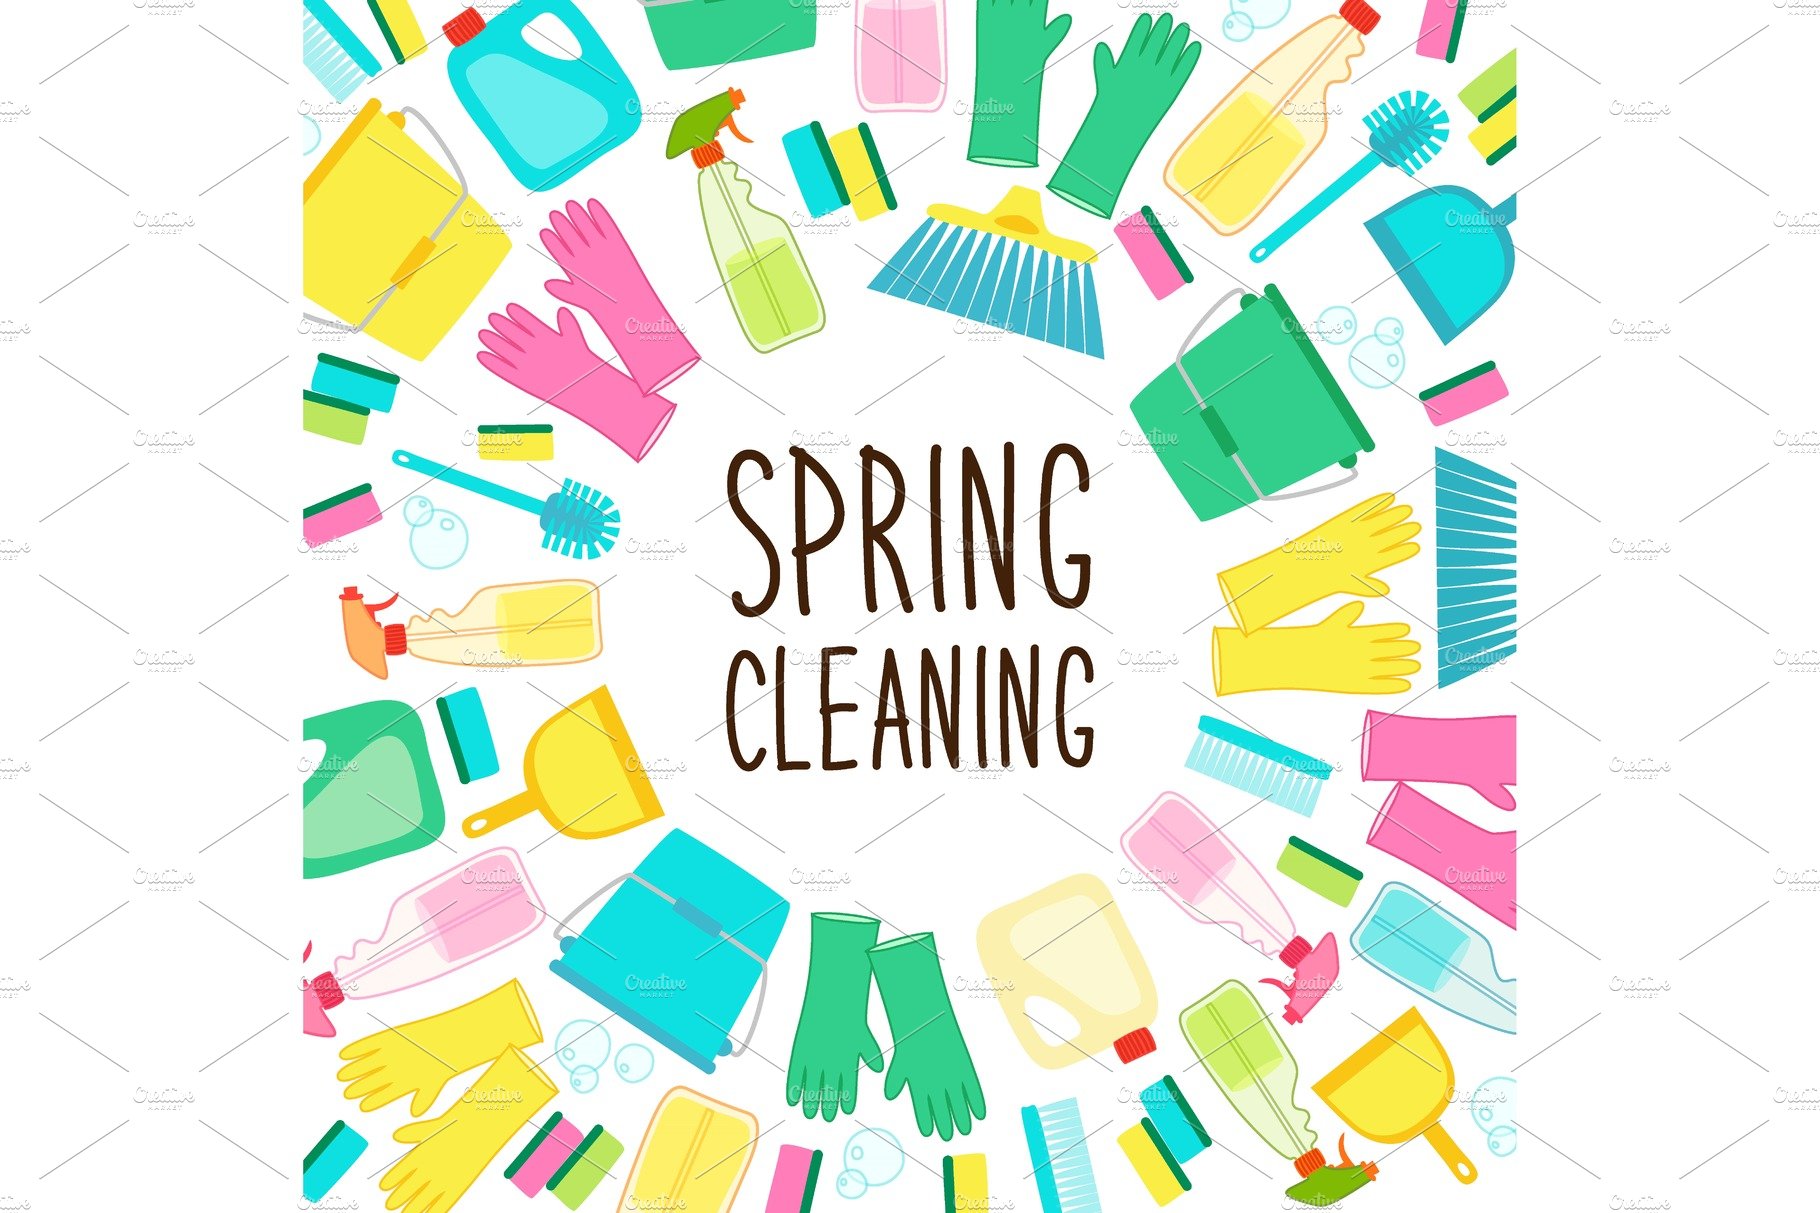 Cute spring cleaning utensils cover image.